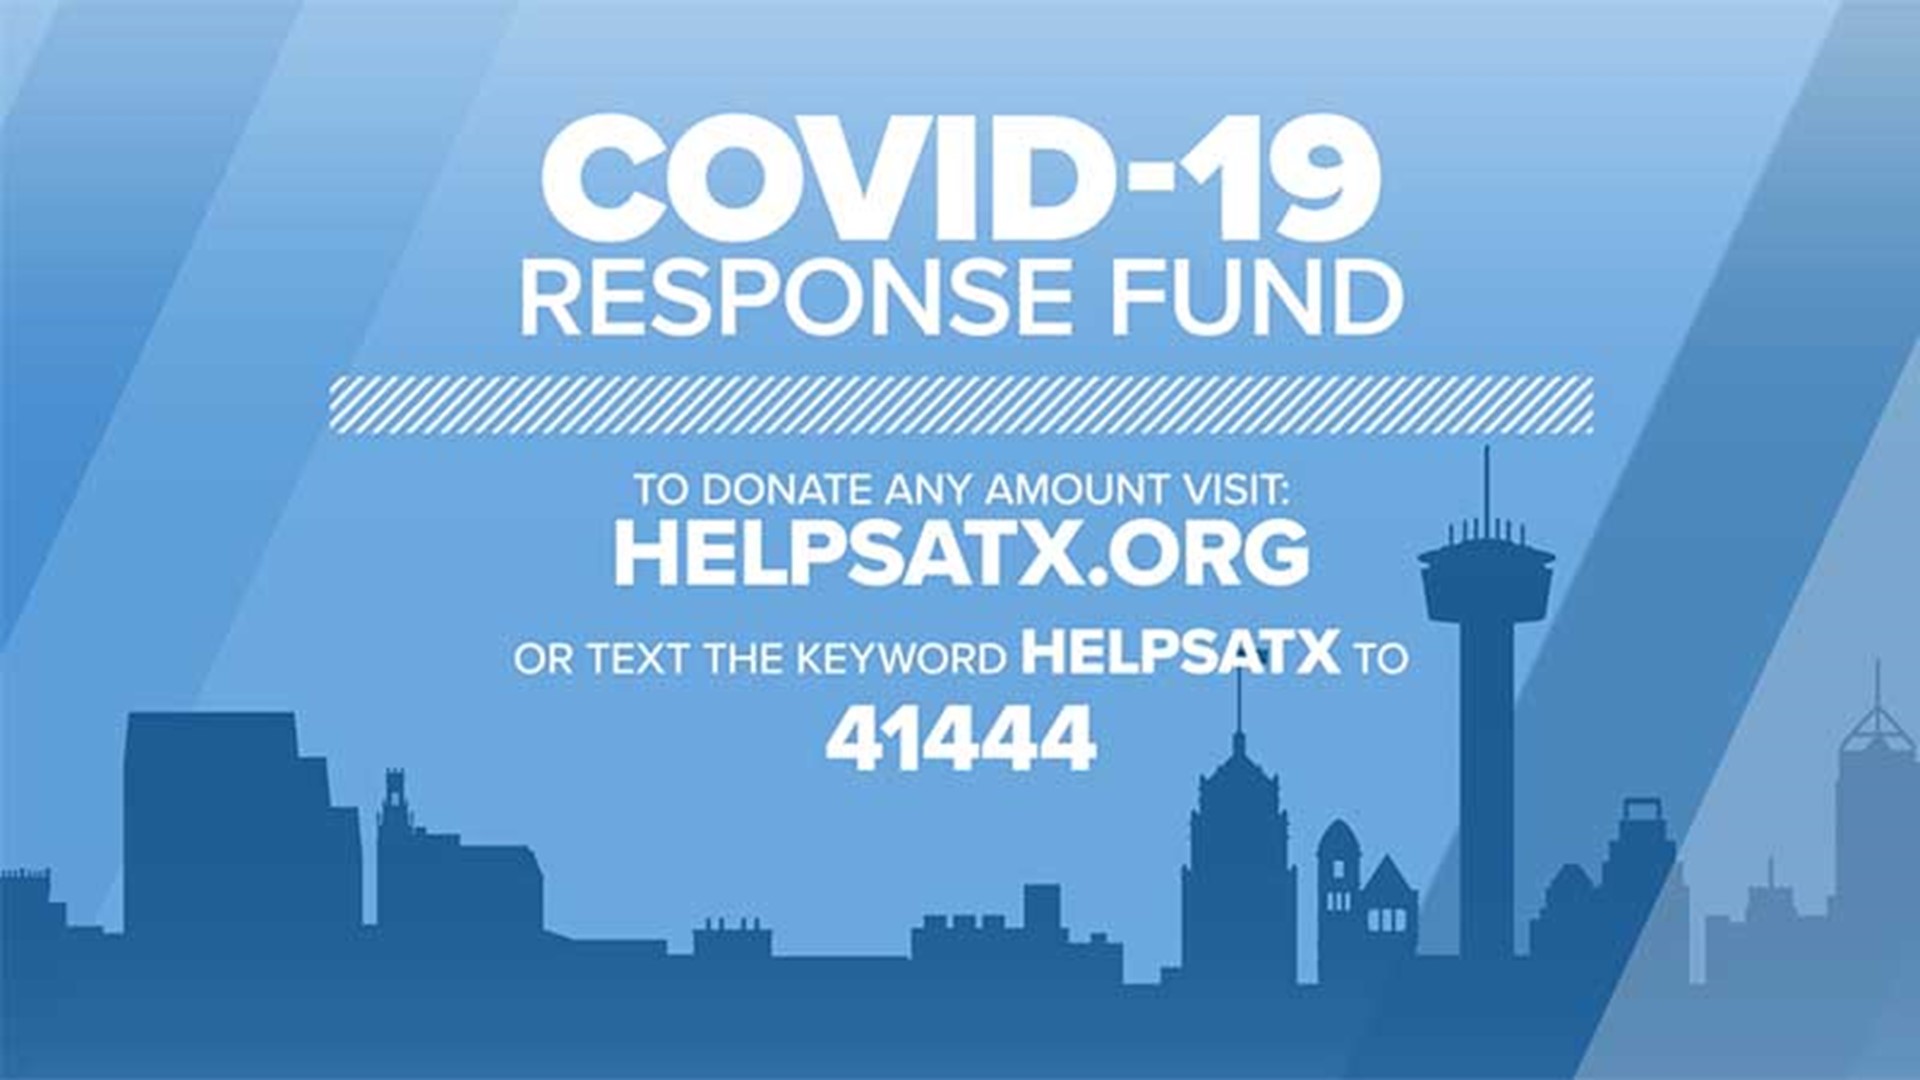 The COVID-19 Community Response Fund will support individuals, families and the San Antonio community struggling in the wake of the new virus.